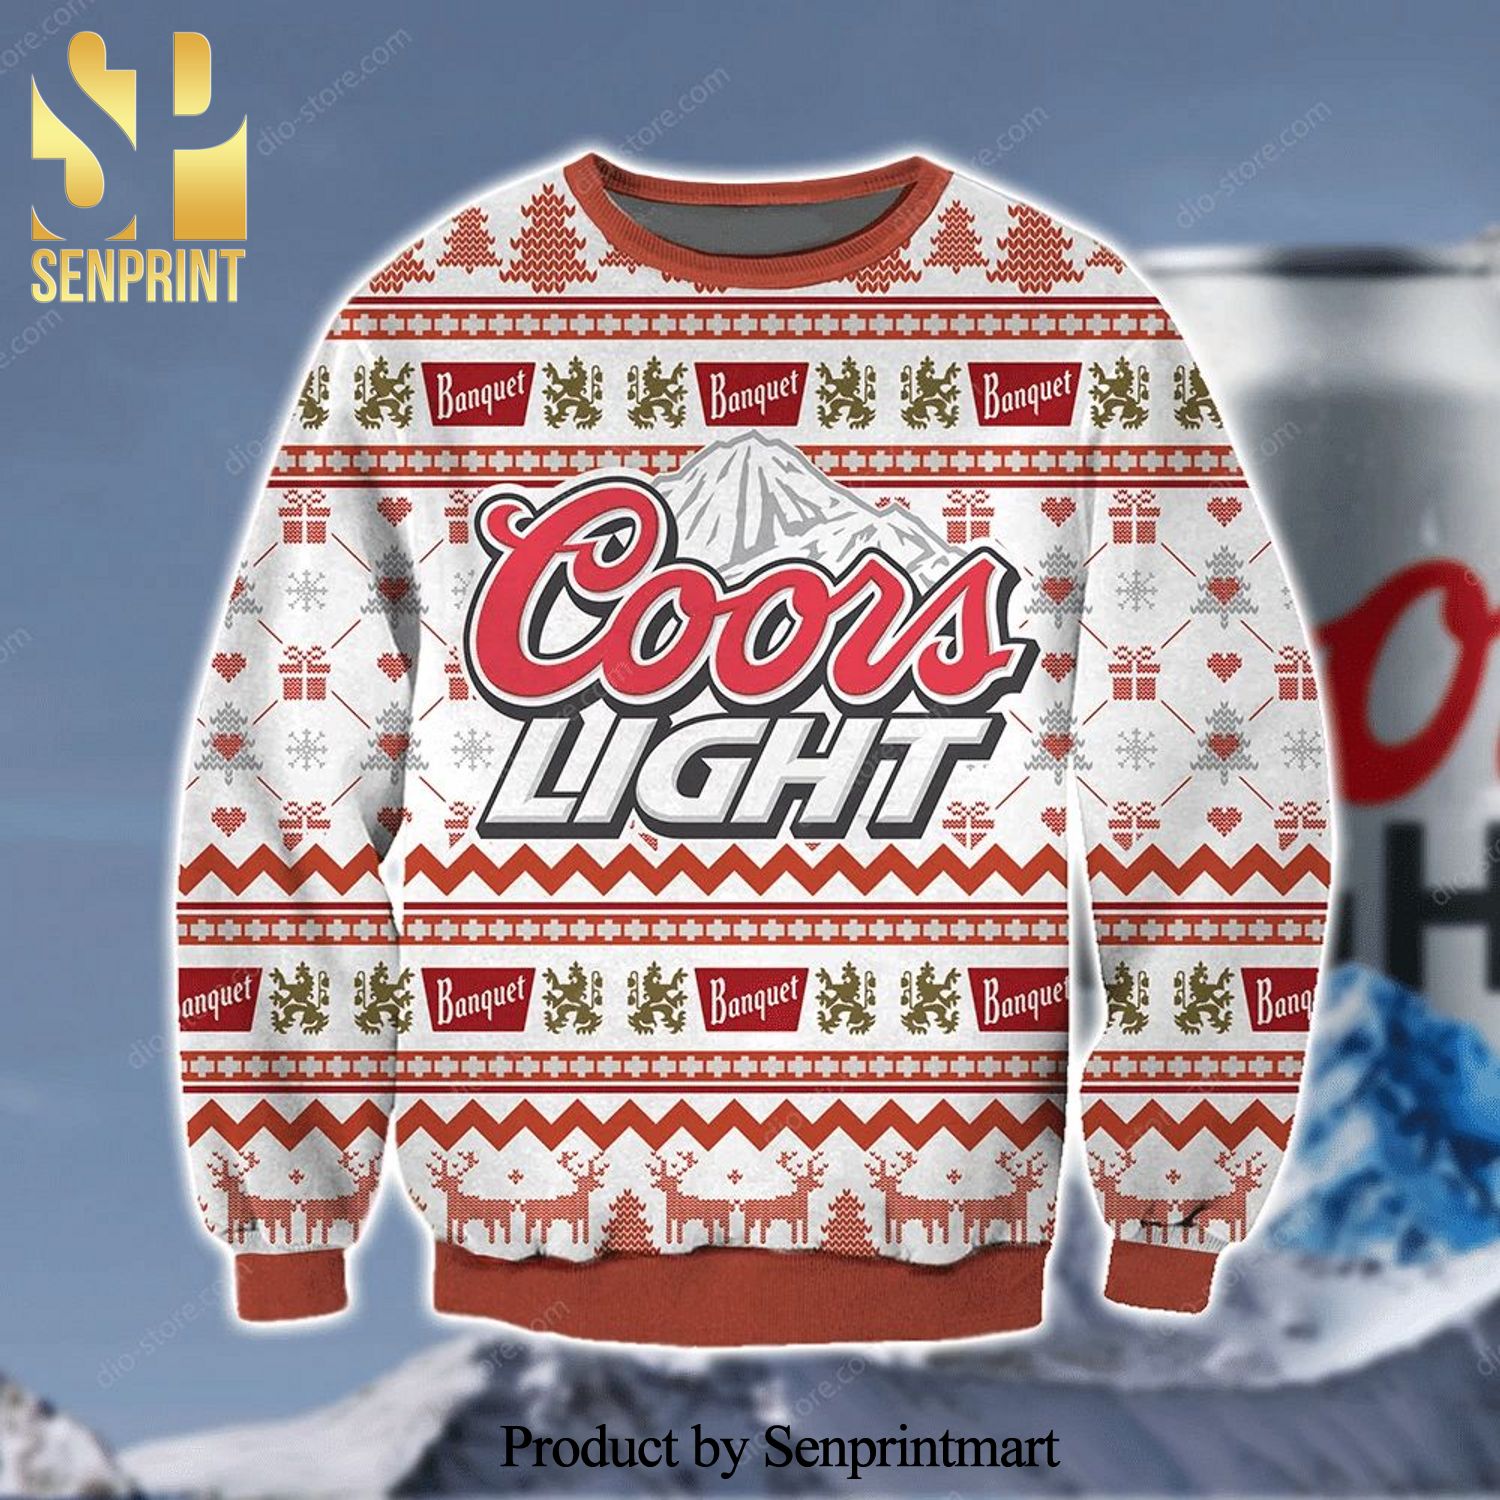 Coors Light Banquet Knitted Ugly Christmas Sweater